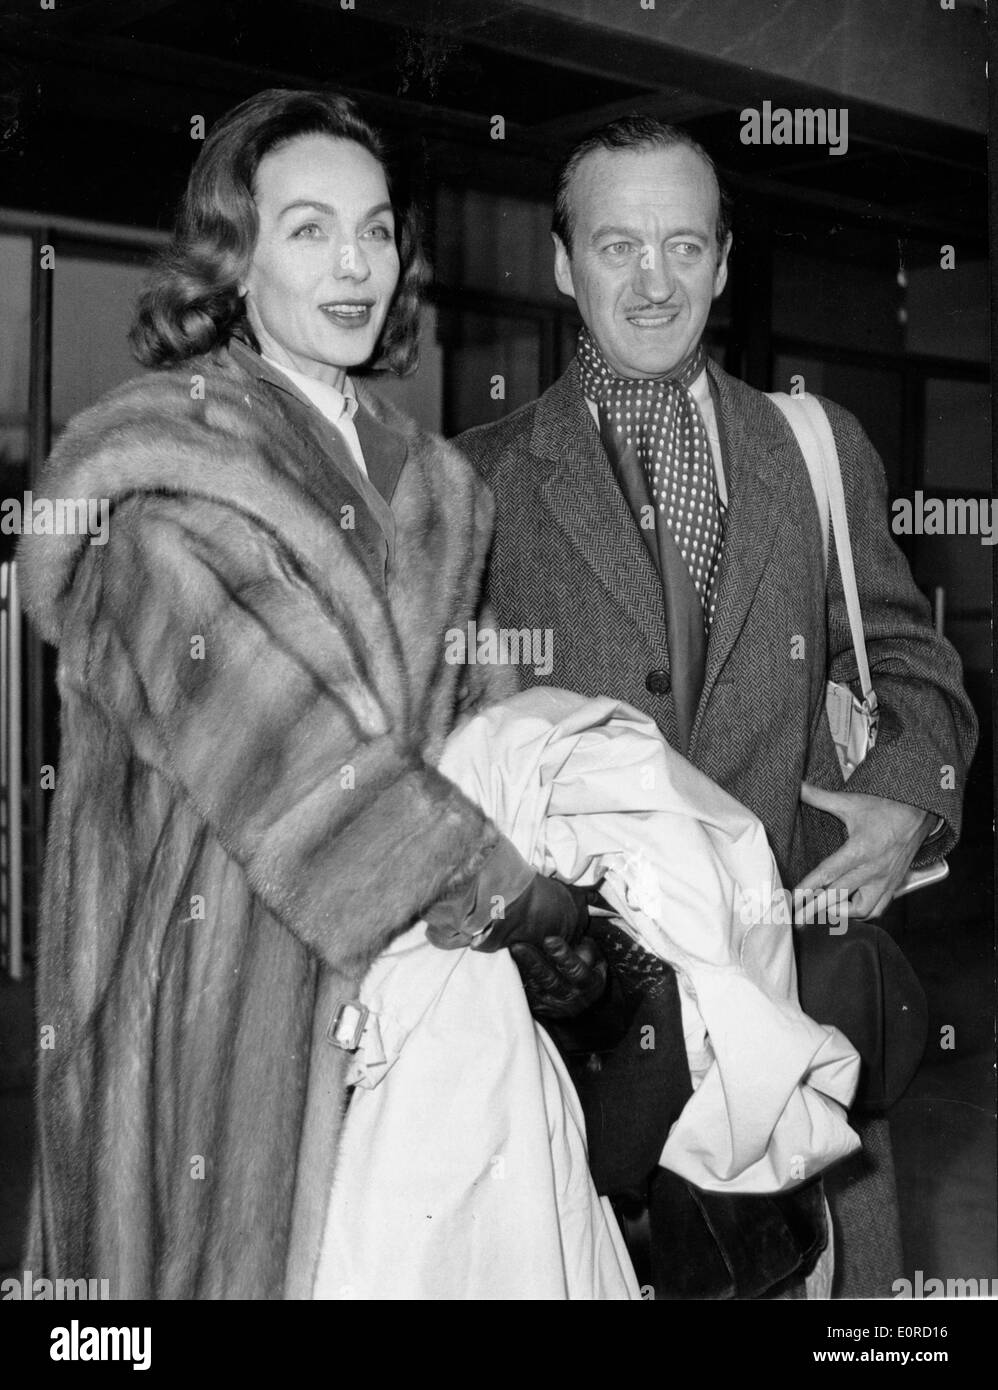 Actor David Niven and wife Hjordis arrive to film a movie Stock Photo